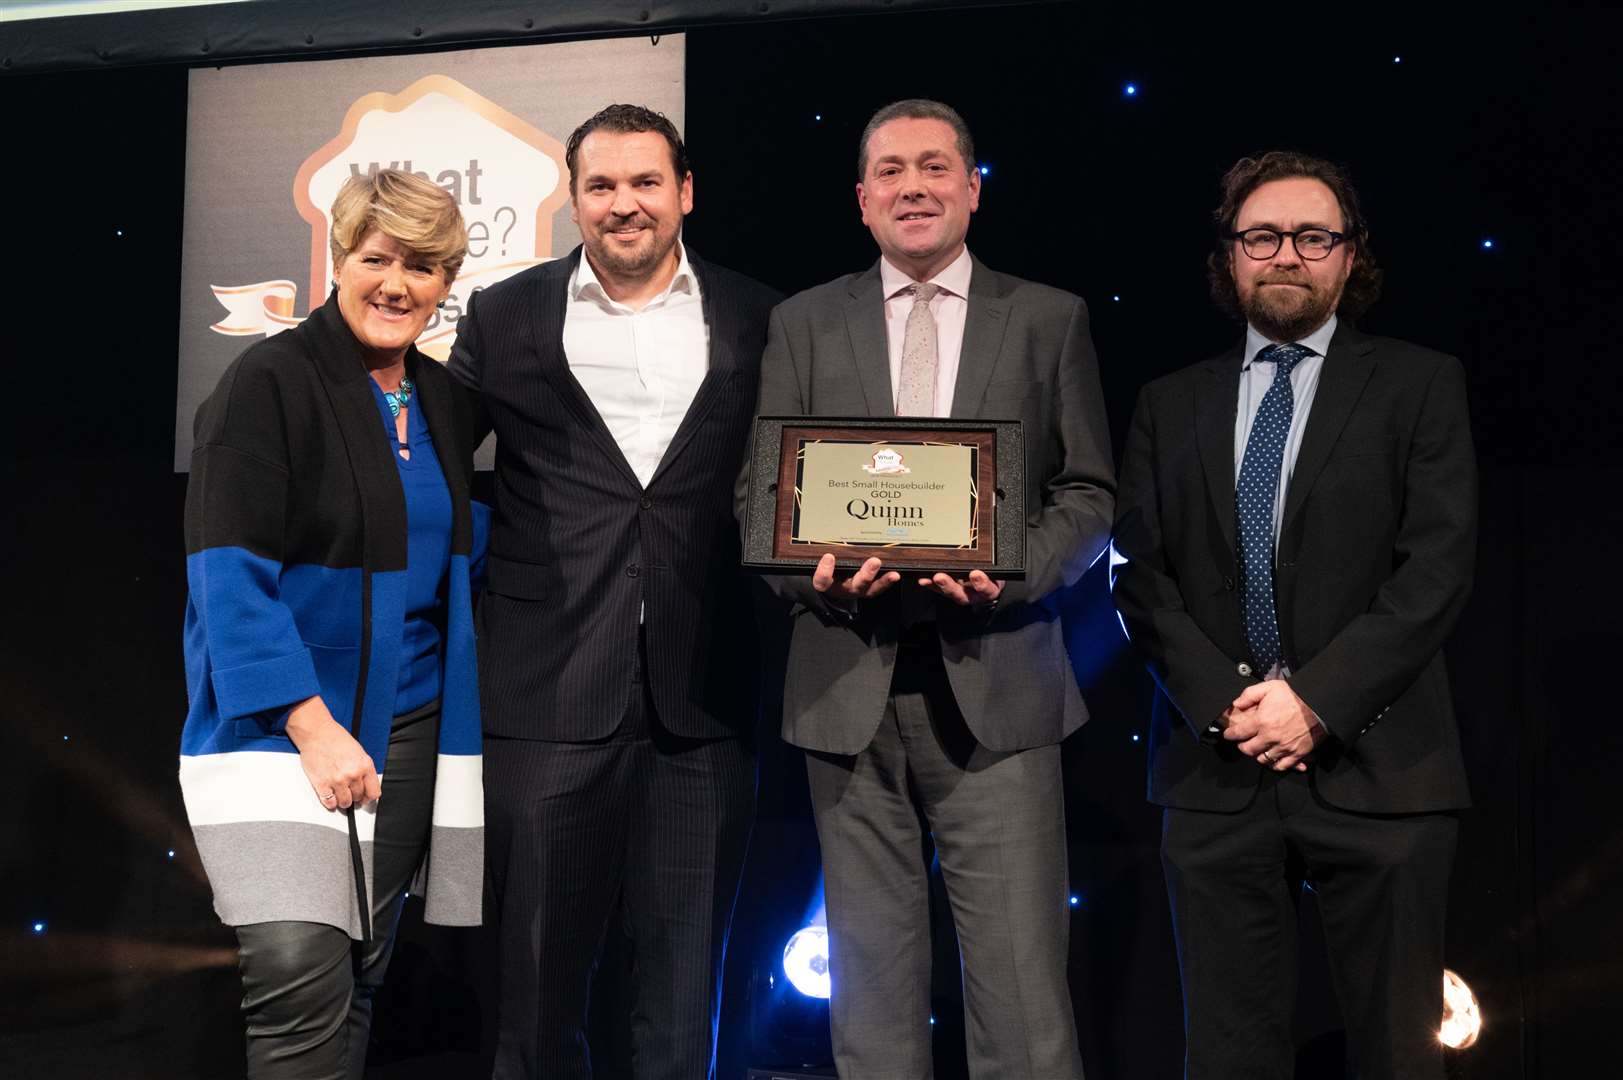 Quinn Homes boss Mark Quinn, second left, collects his award from Clare Balding, far left at the WhatHouse? Awards